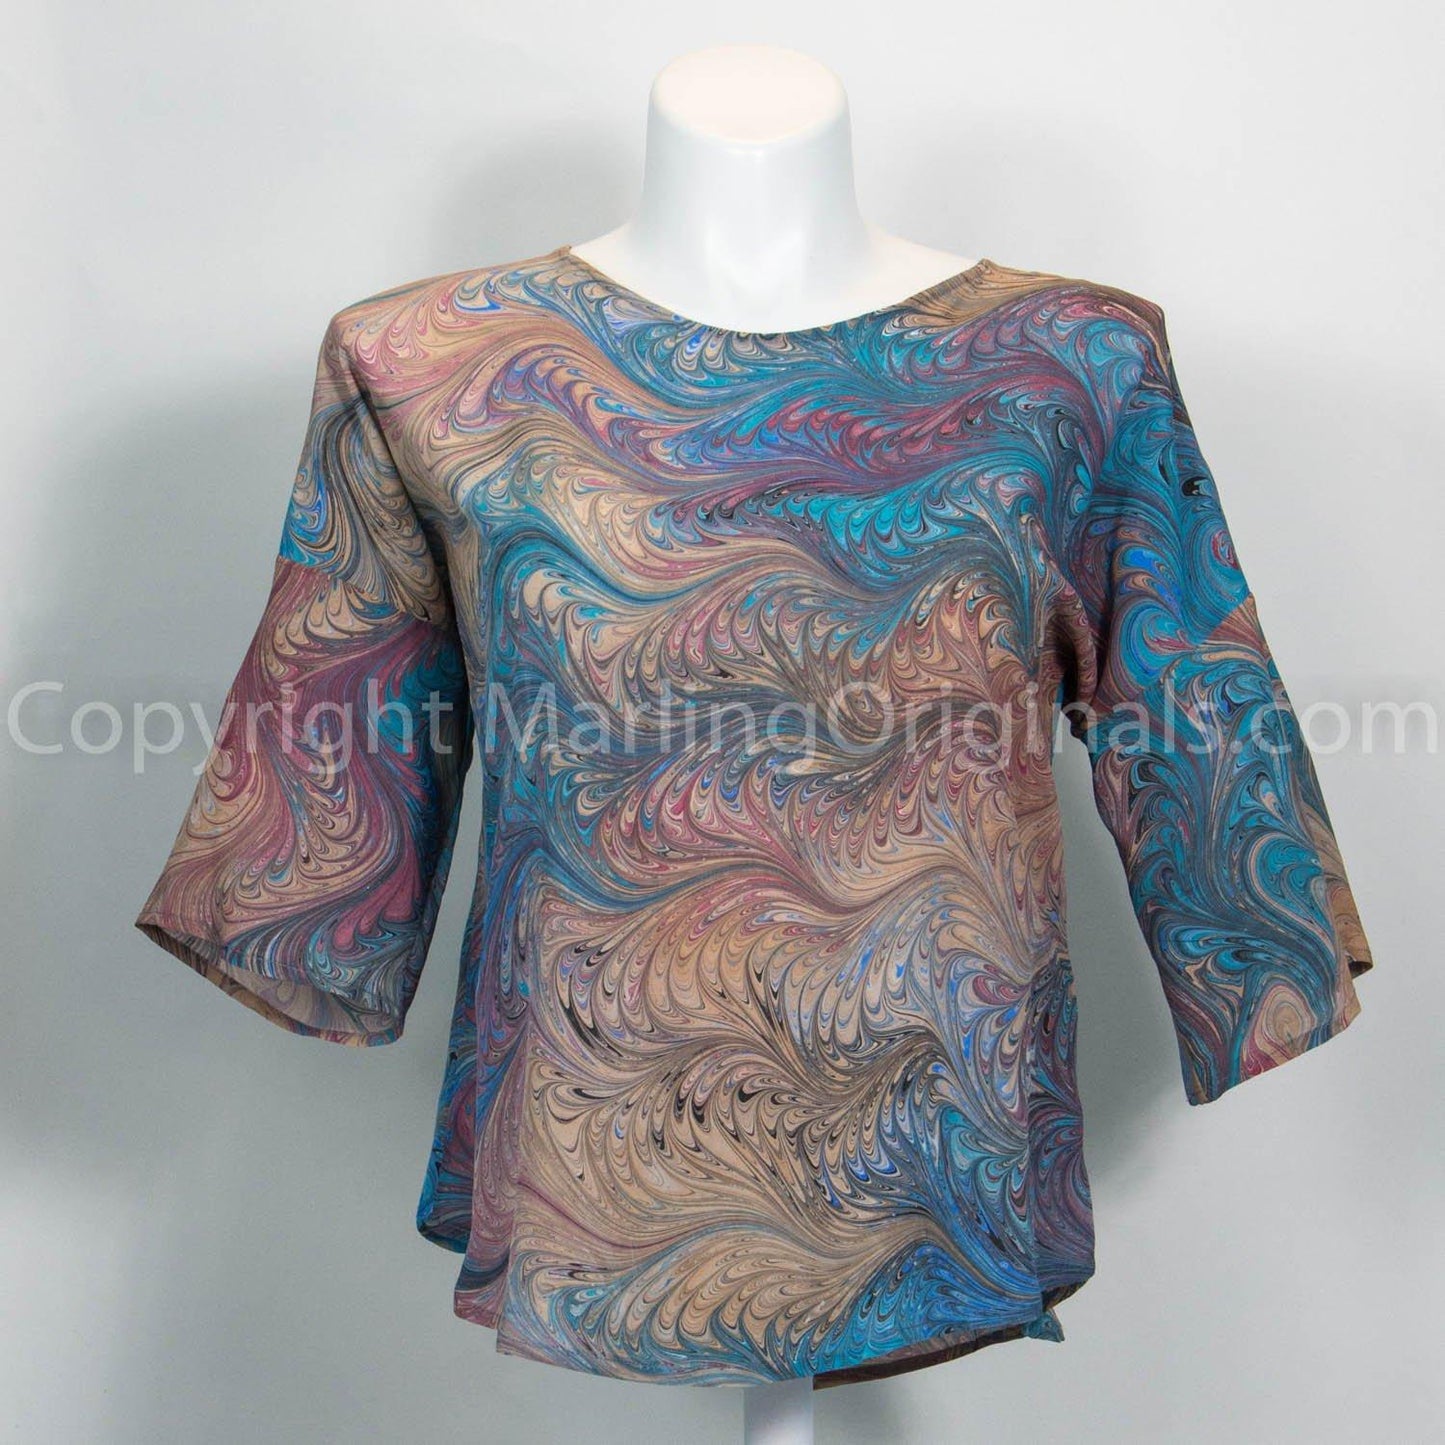 handmade silk top in rose, teal, sand and blue.  Longer sleeve, round neck, flattering cut.